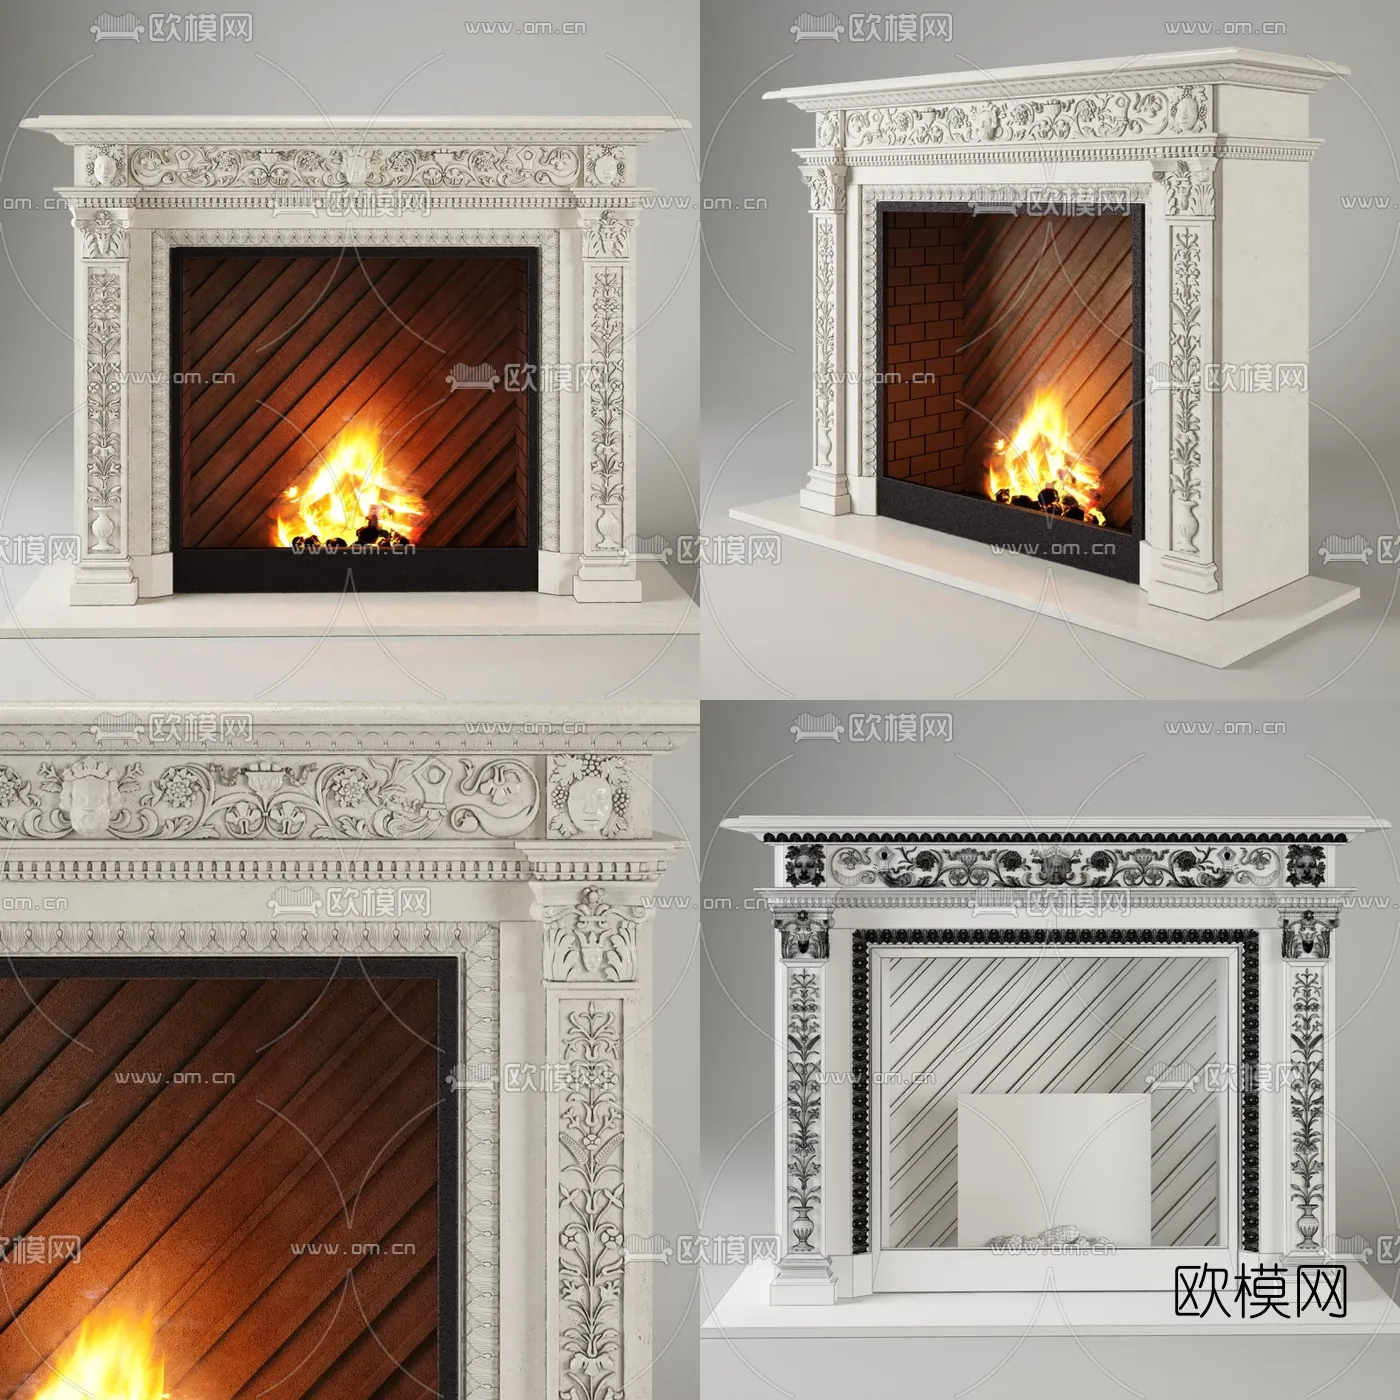 CLASSIC – FIREPLACE 3DMODELS – 056